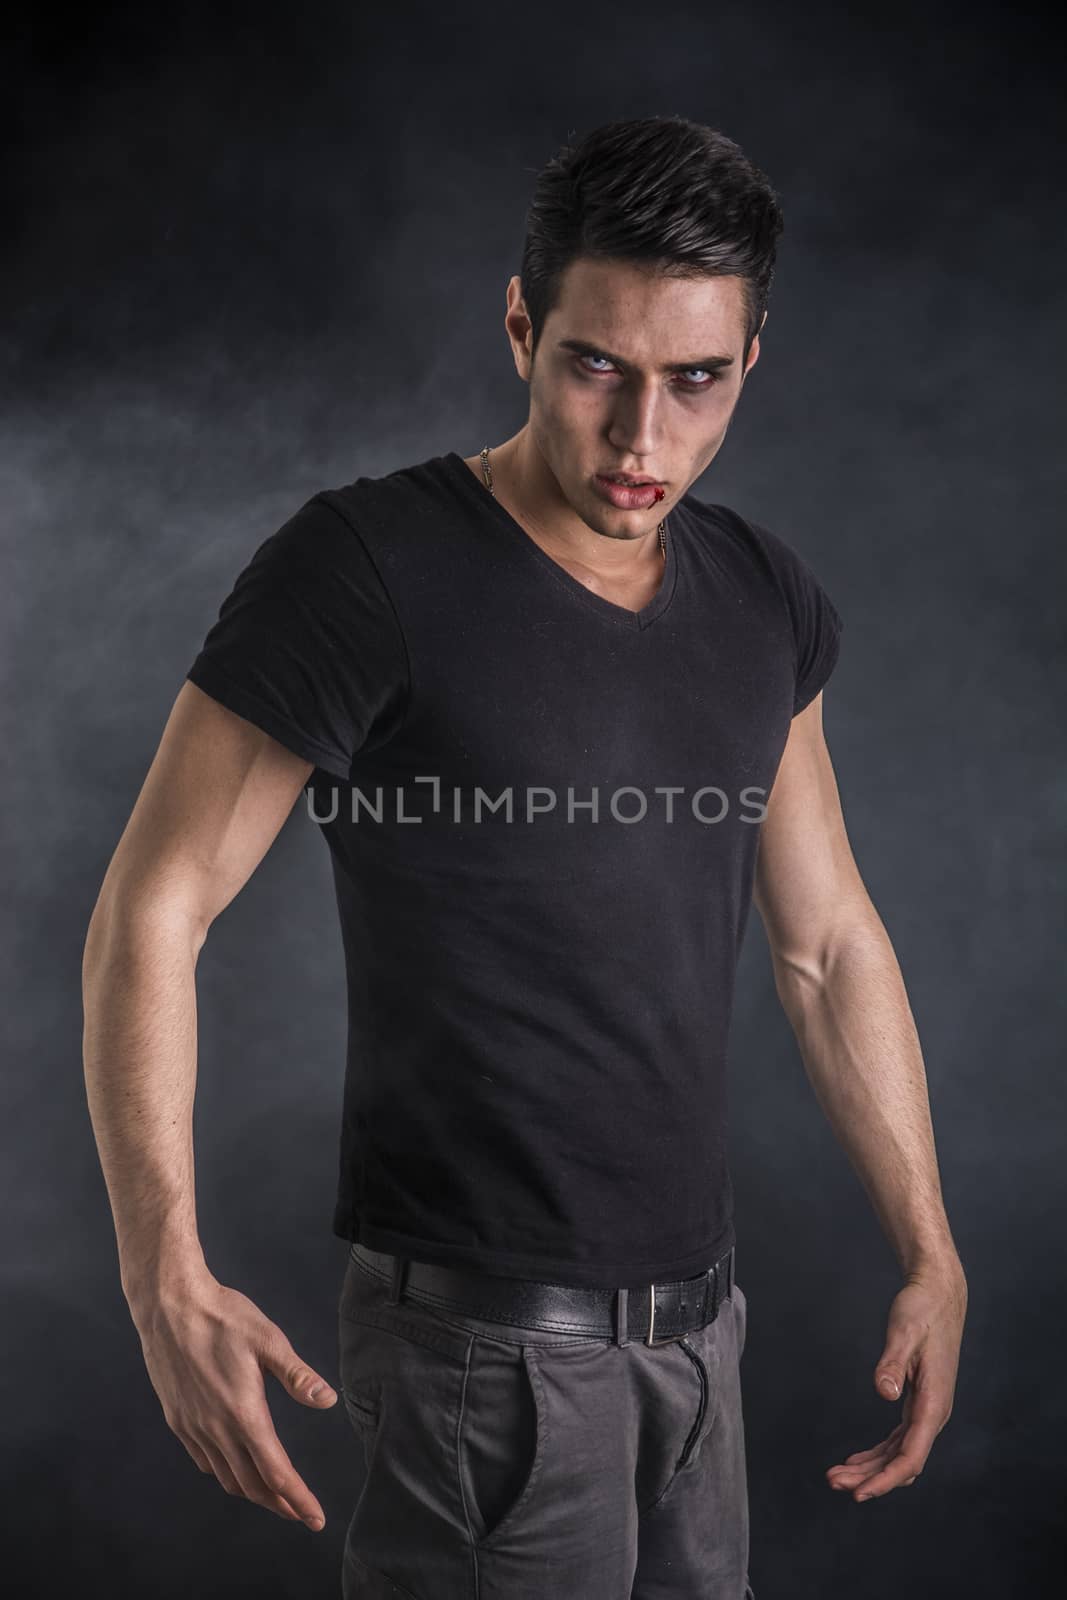 Portrait of a Young Vampire Man with Black T-Shirt by artofphoto